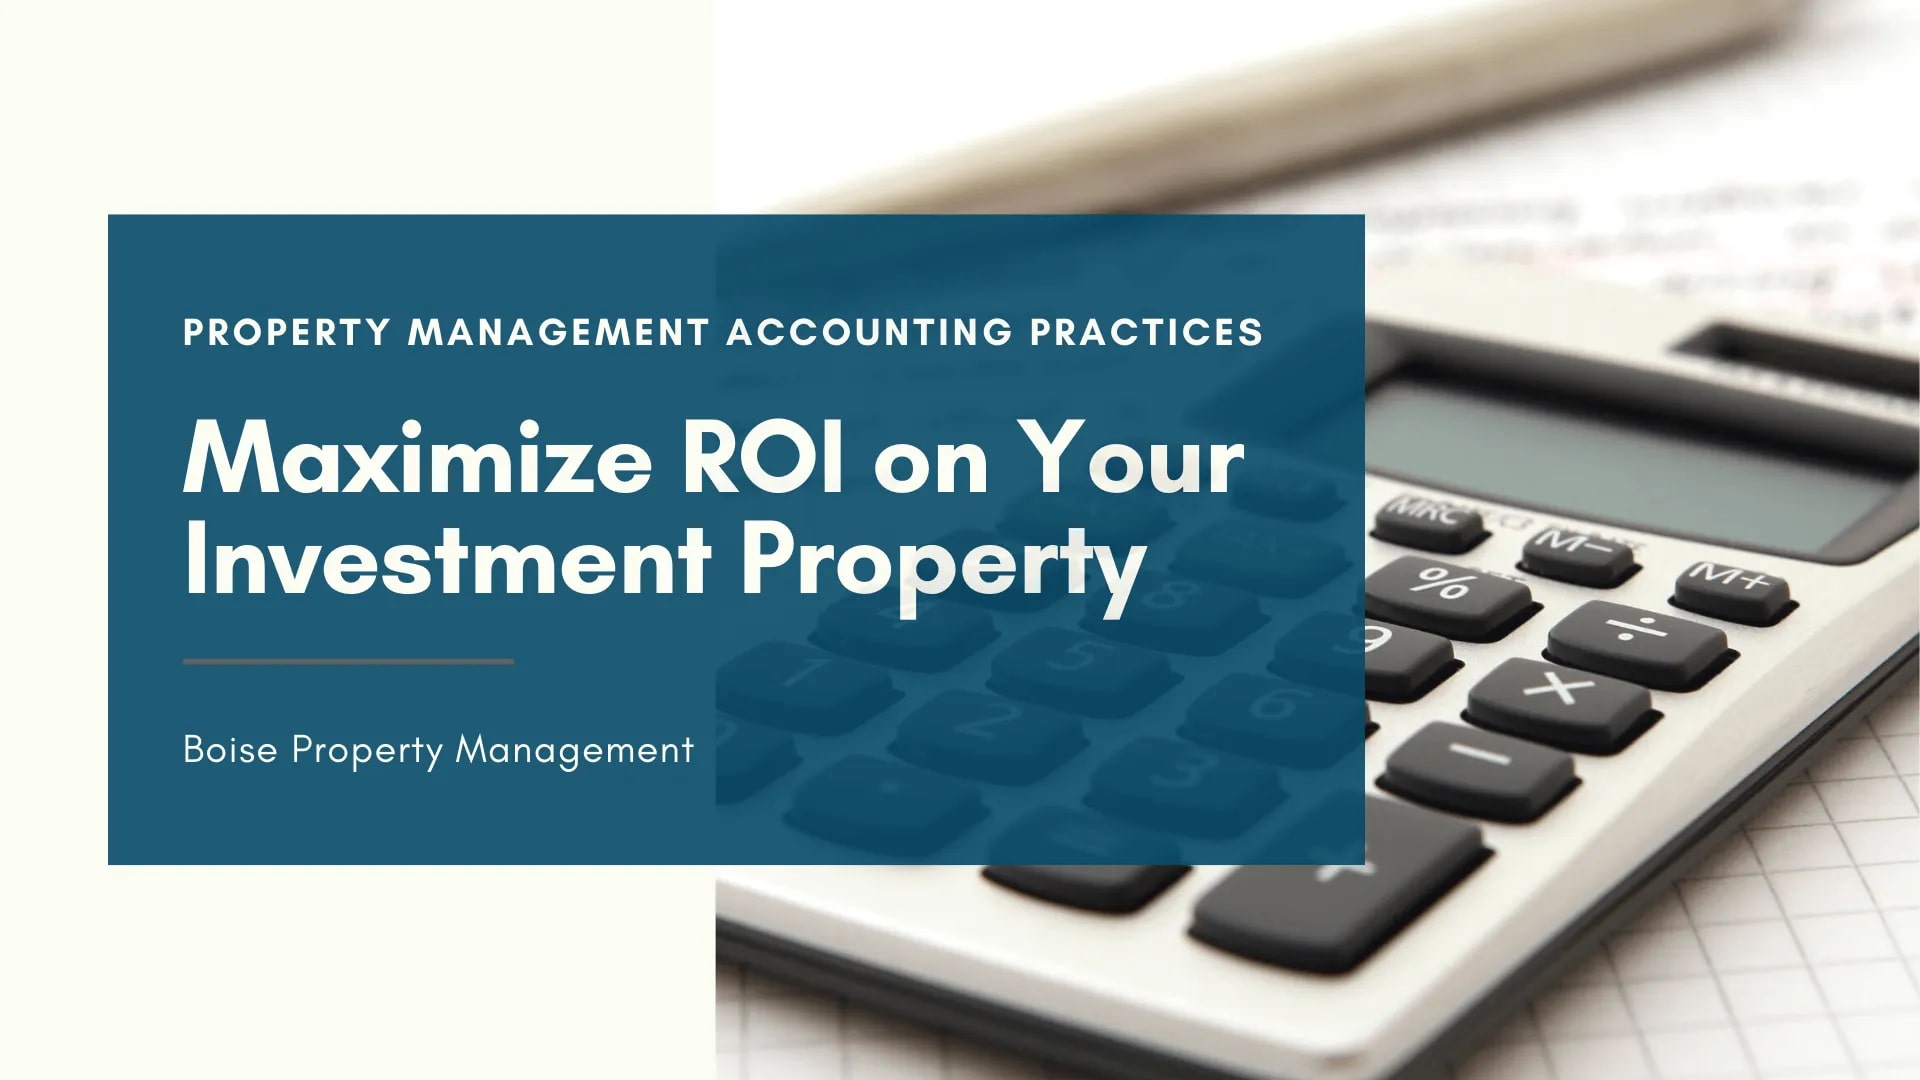 Property Management Accounting Practices to Maximize ROI on Your Boise Investment Property